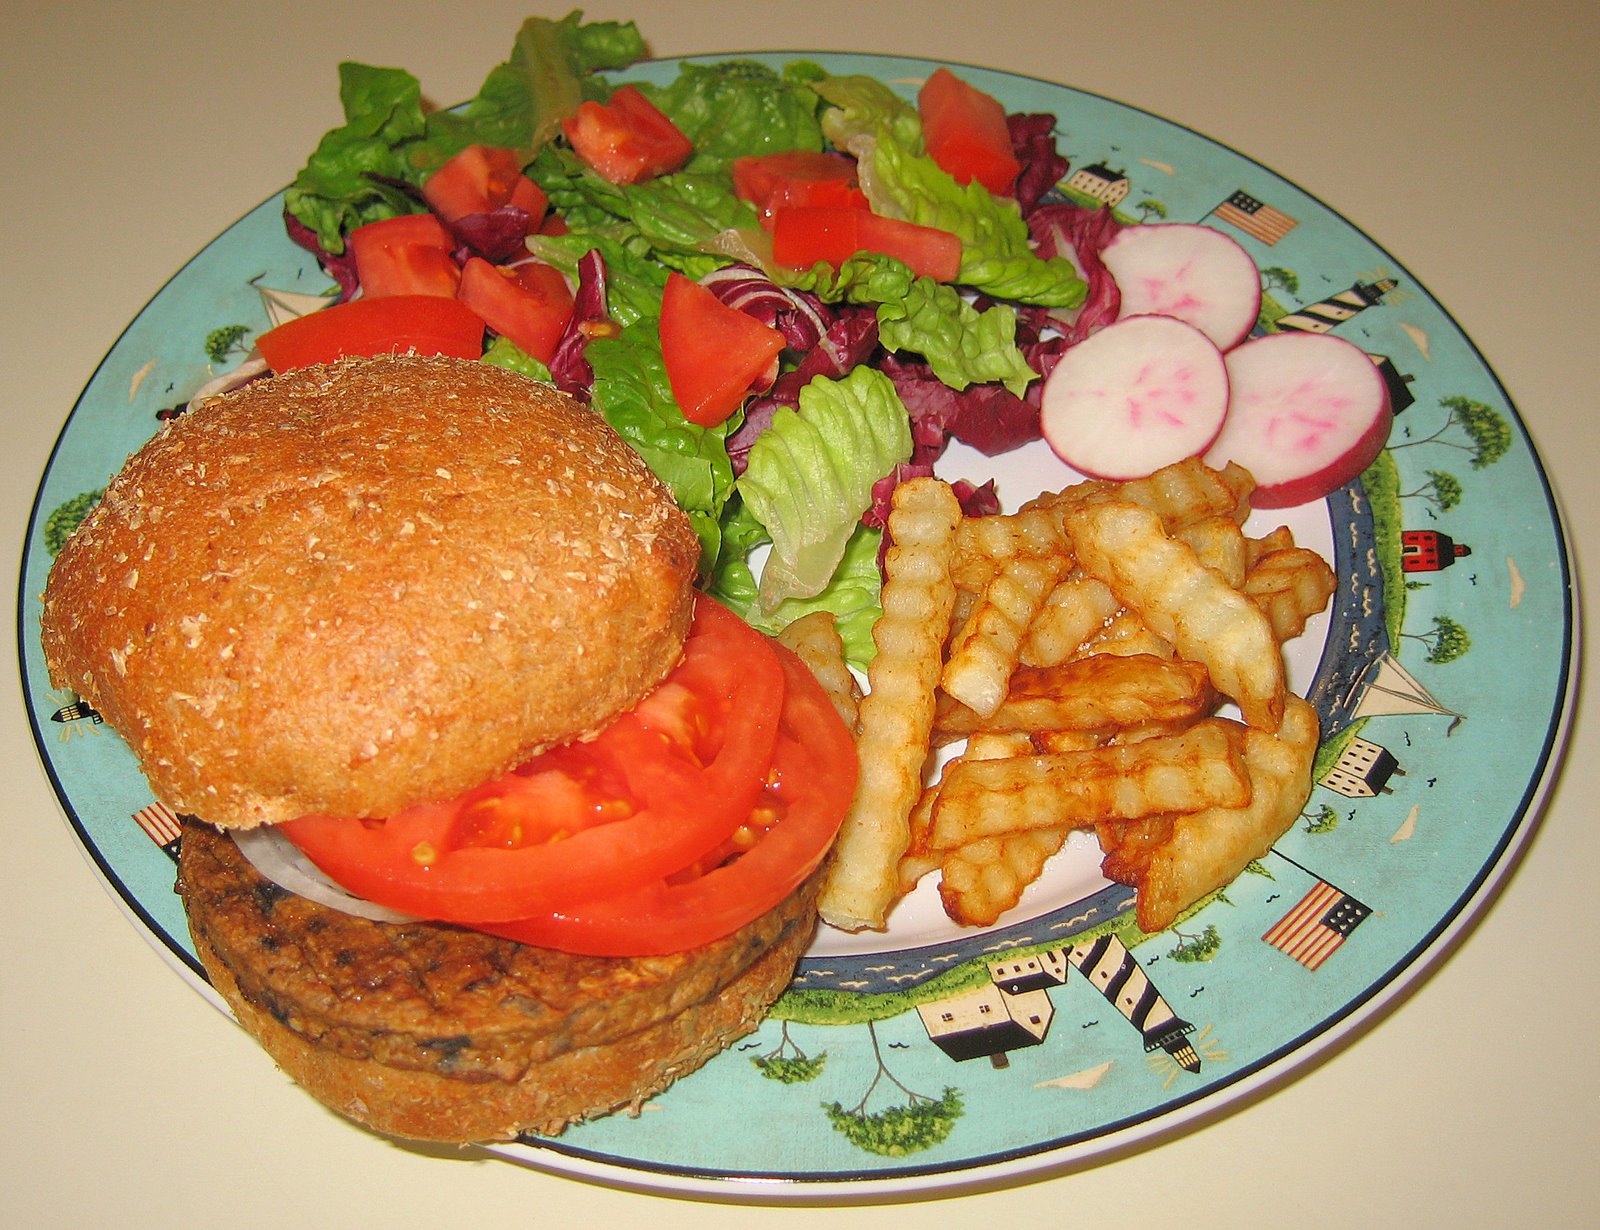 [20070901+Eggplant+Burger+with+French+Fries.jpg]